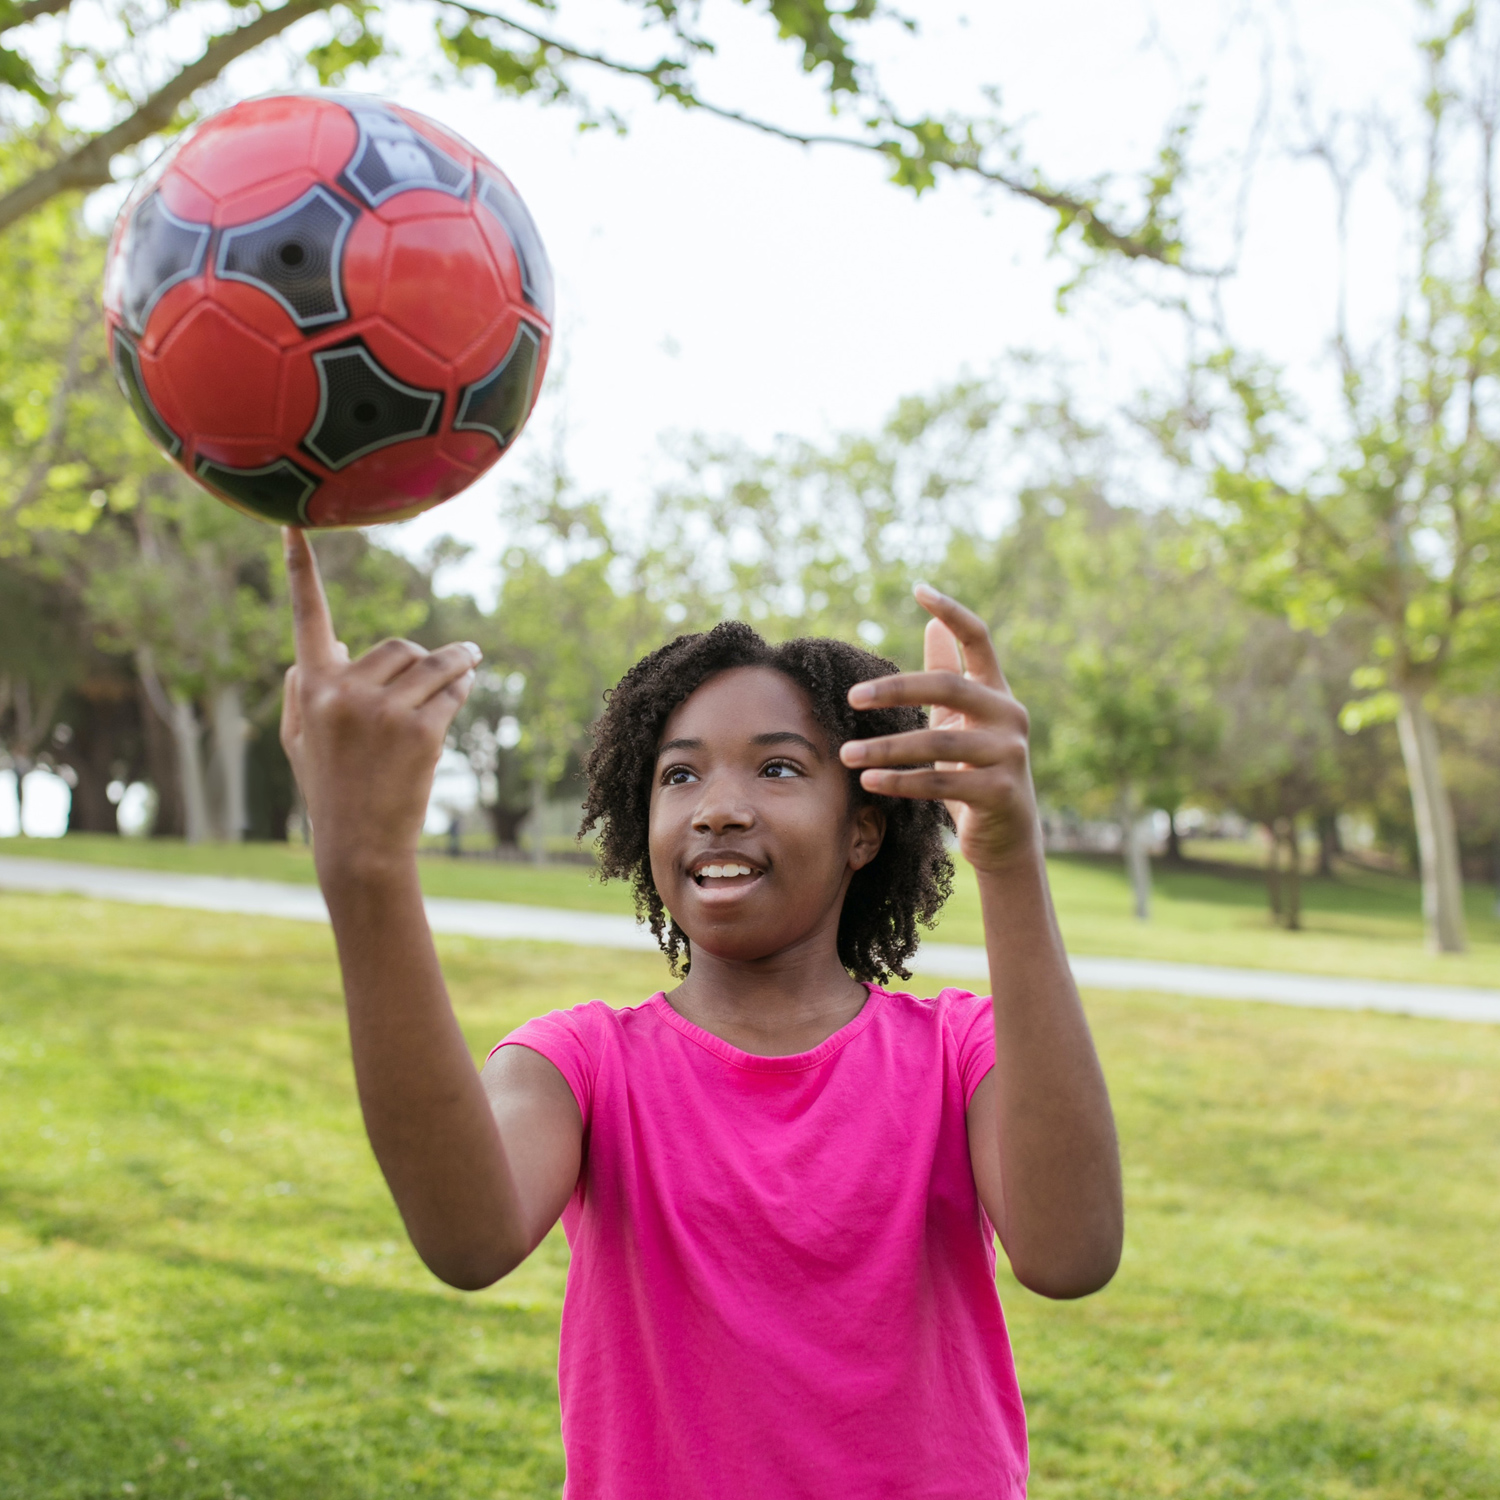 A young girl wearing a pink top spins a ball on her finger in the park